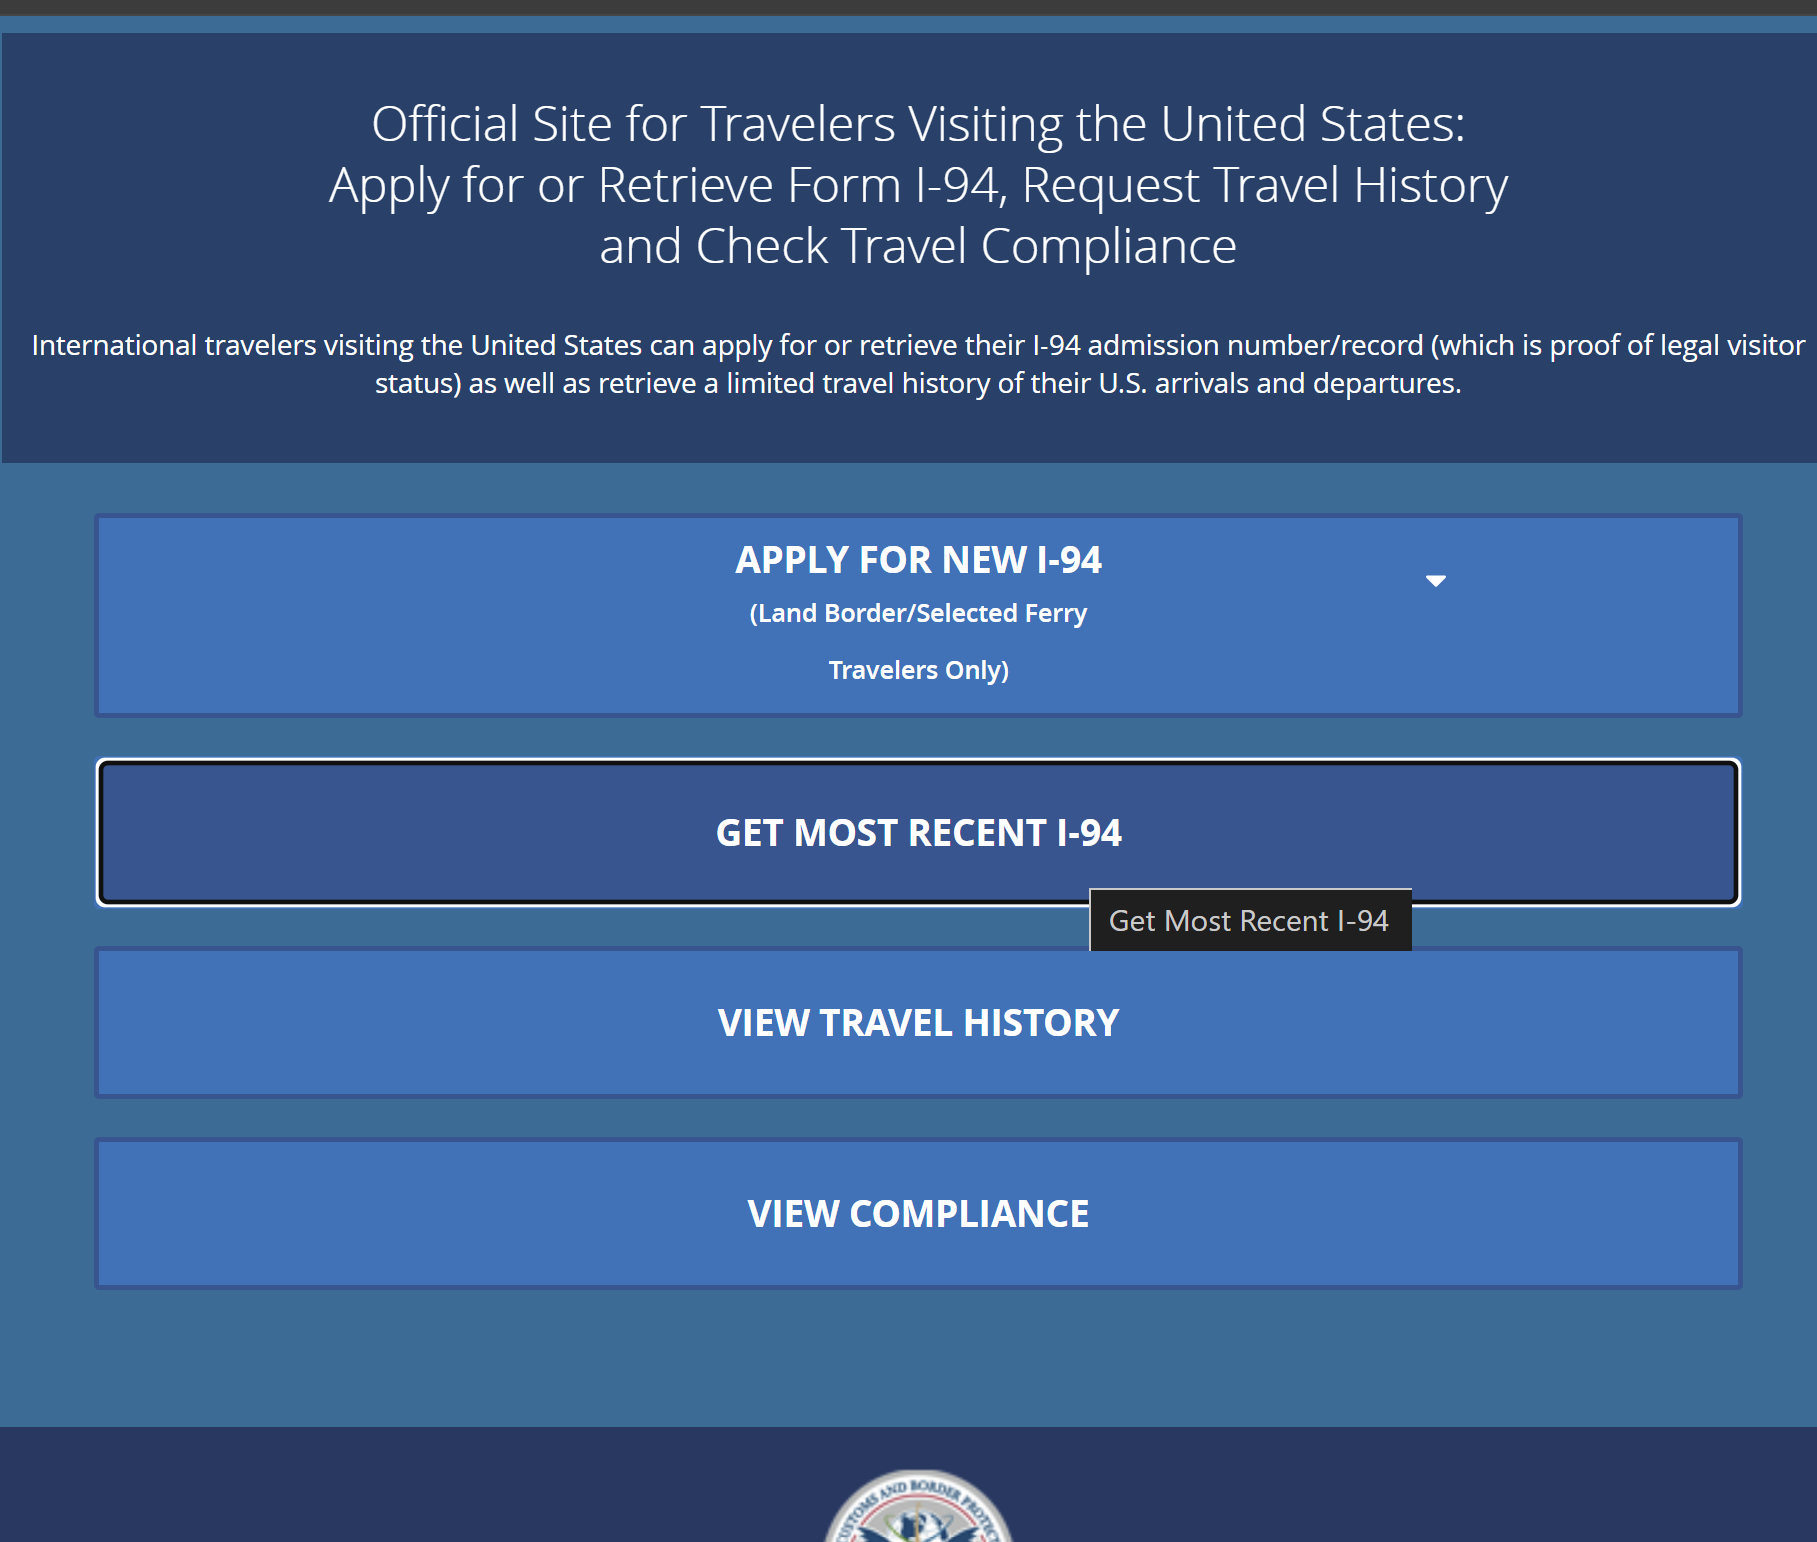 &quot;Screenshot of the official U.S. Customs and Border Protection I-94 website with options to apply for a new I-94, get the most recent I-94, view travel history, and check travel compliance.